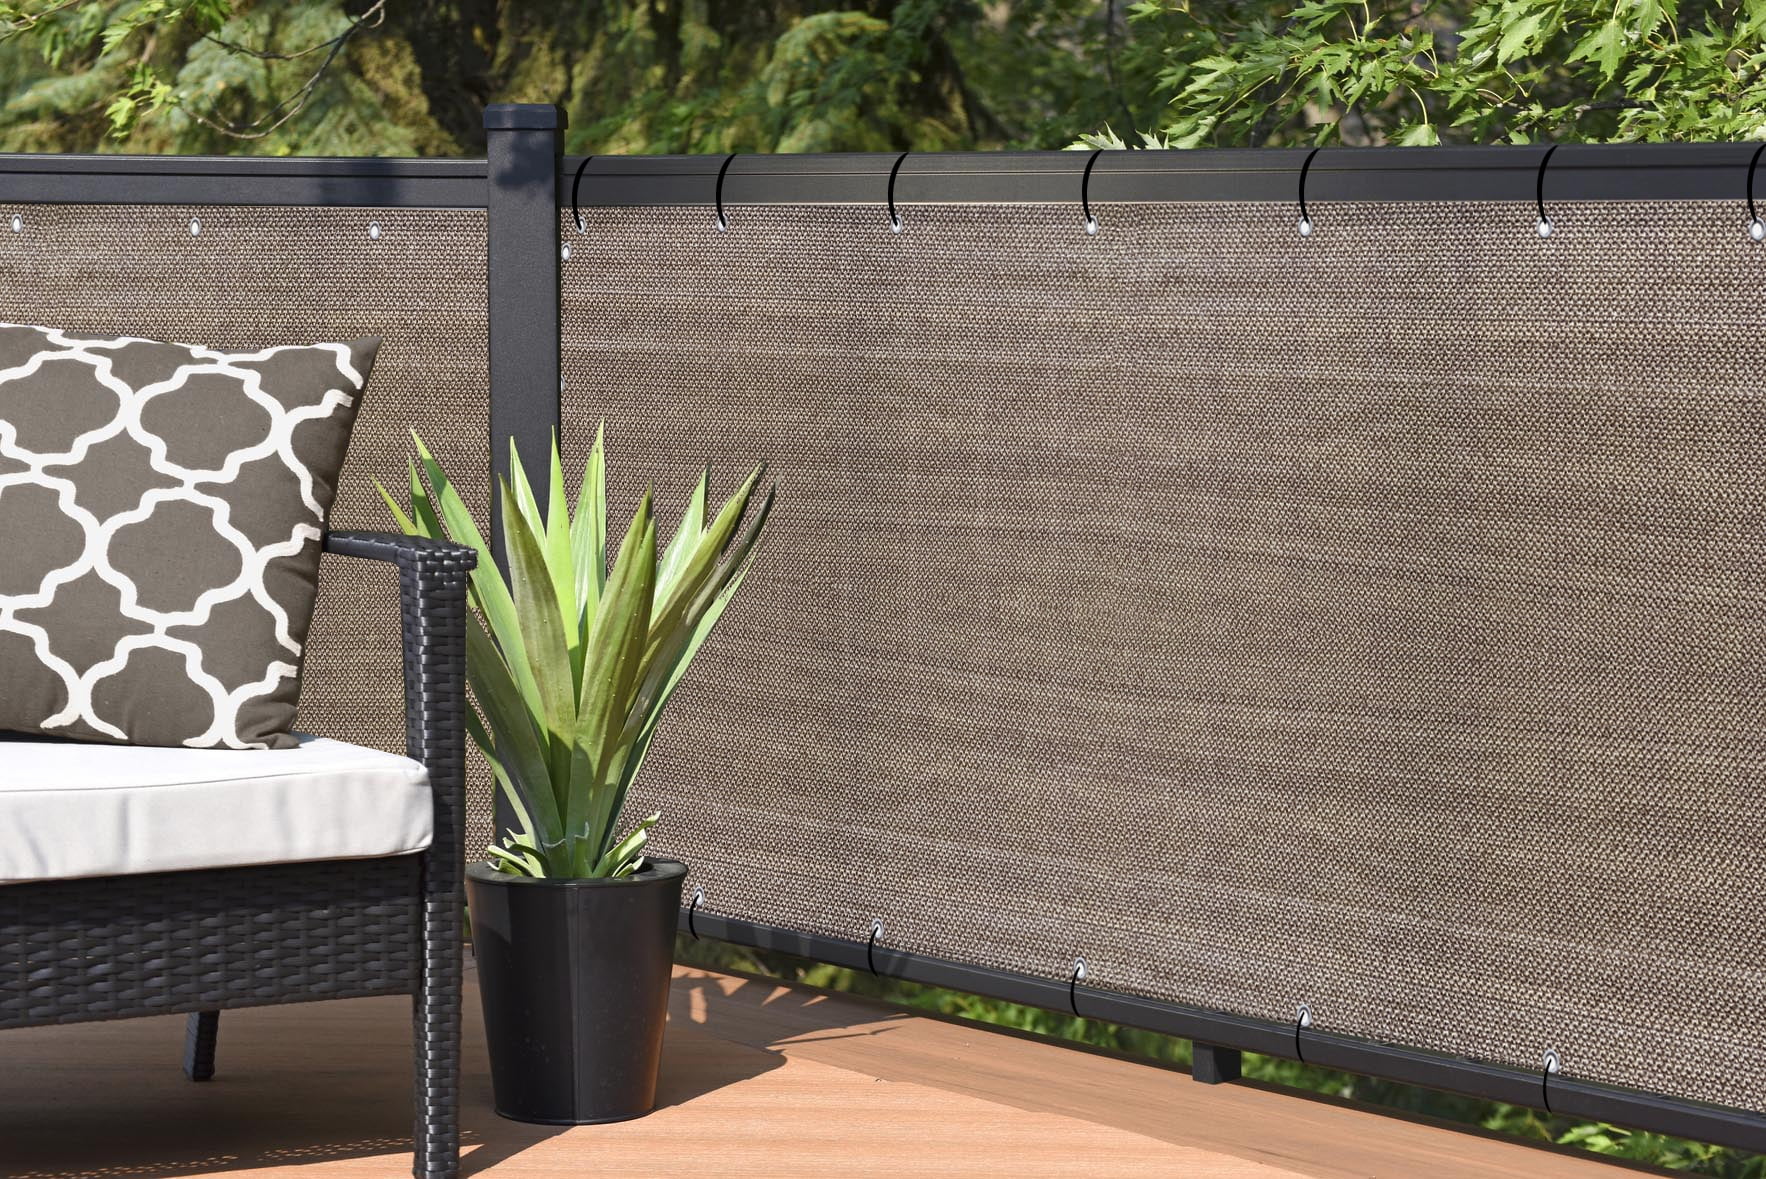 Brown heavy duty 3ft tall 200GSM Privacy Fence Deck Screen Home Yard Shade Patio 